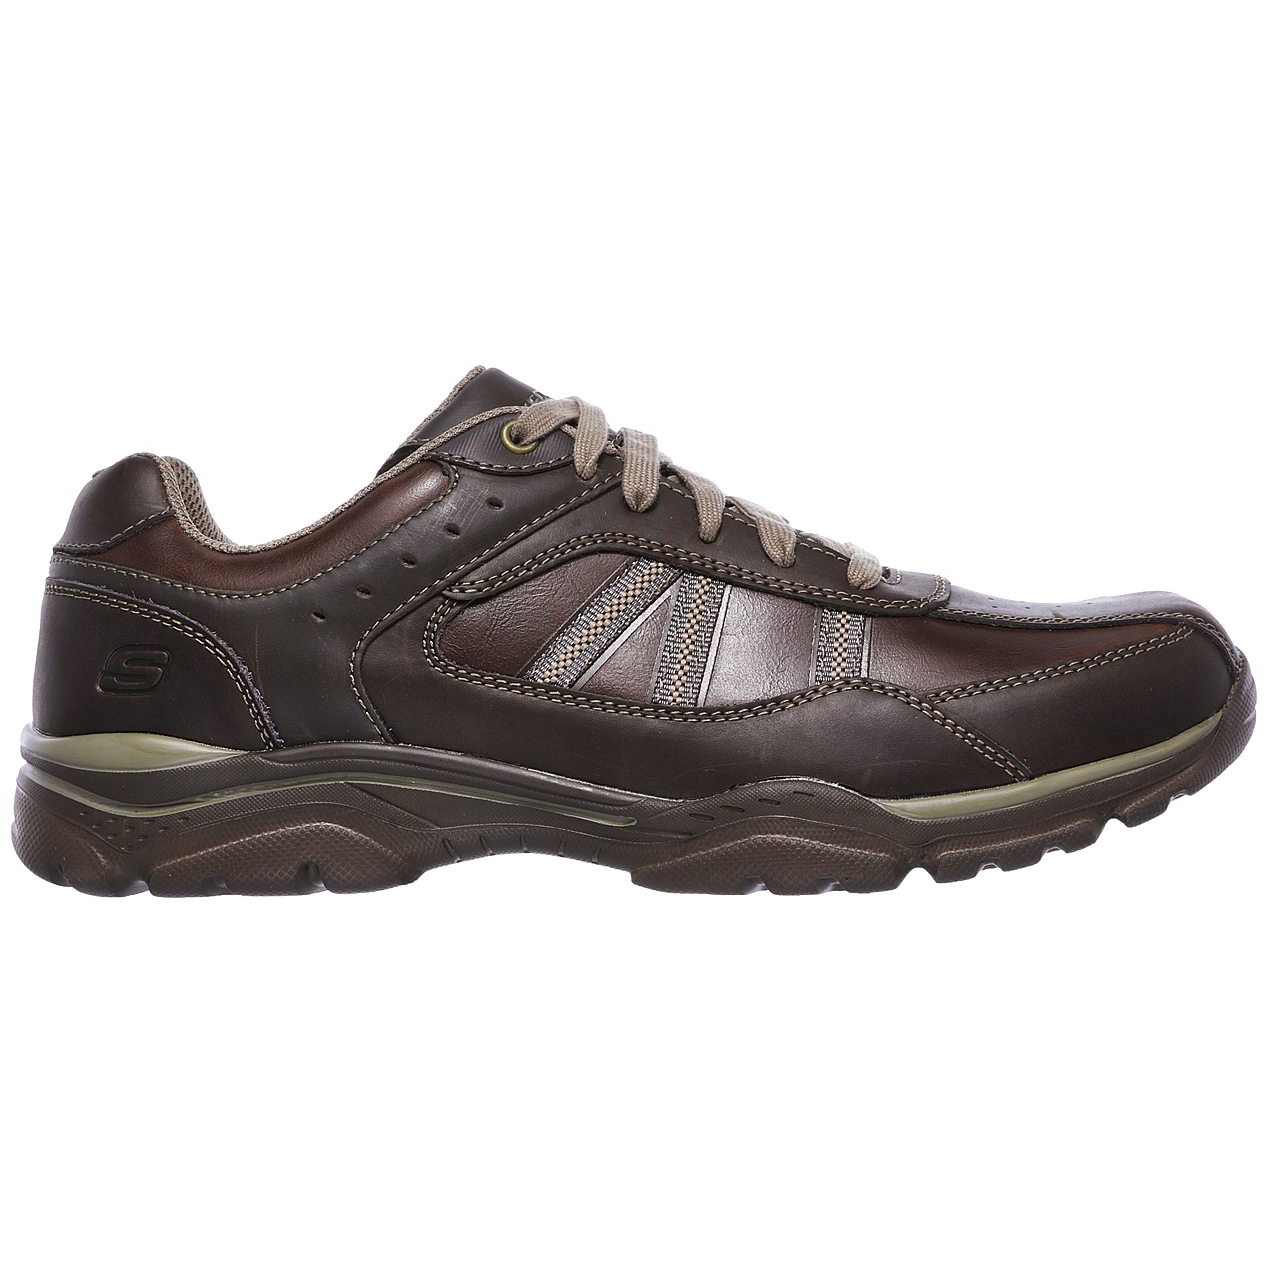 Skechers Mens Rovato Texon Extra Wide Fit Leather Lace Up Shoes - Chocolate 2951